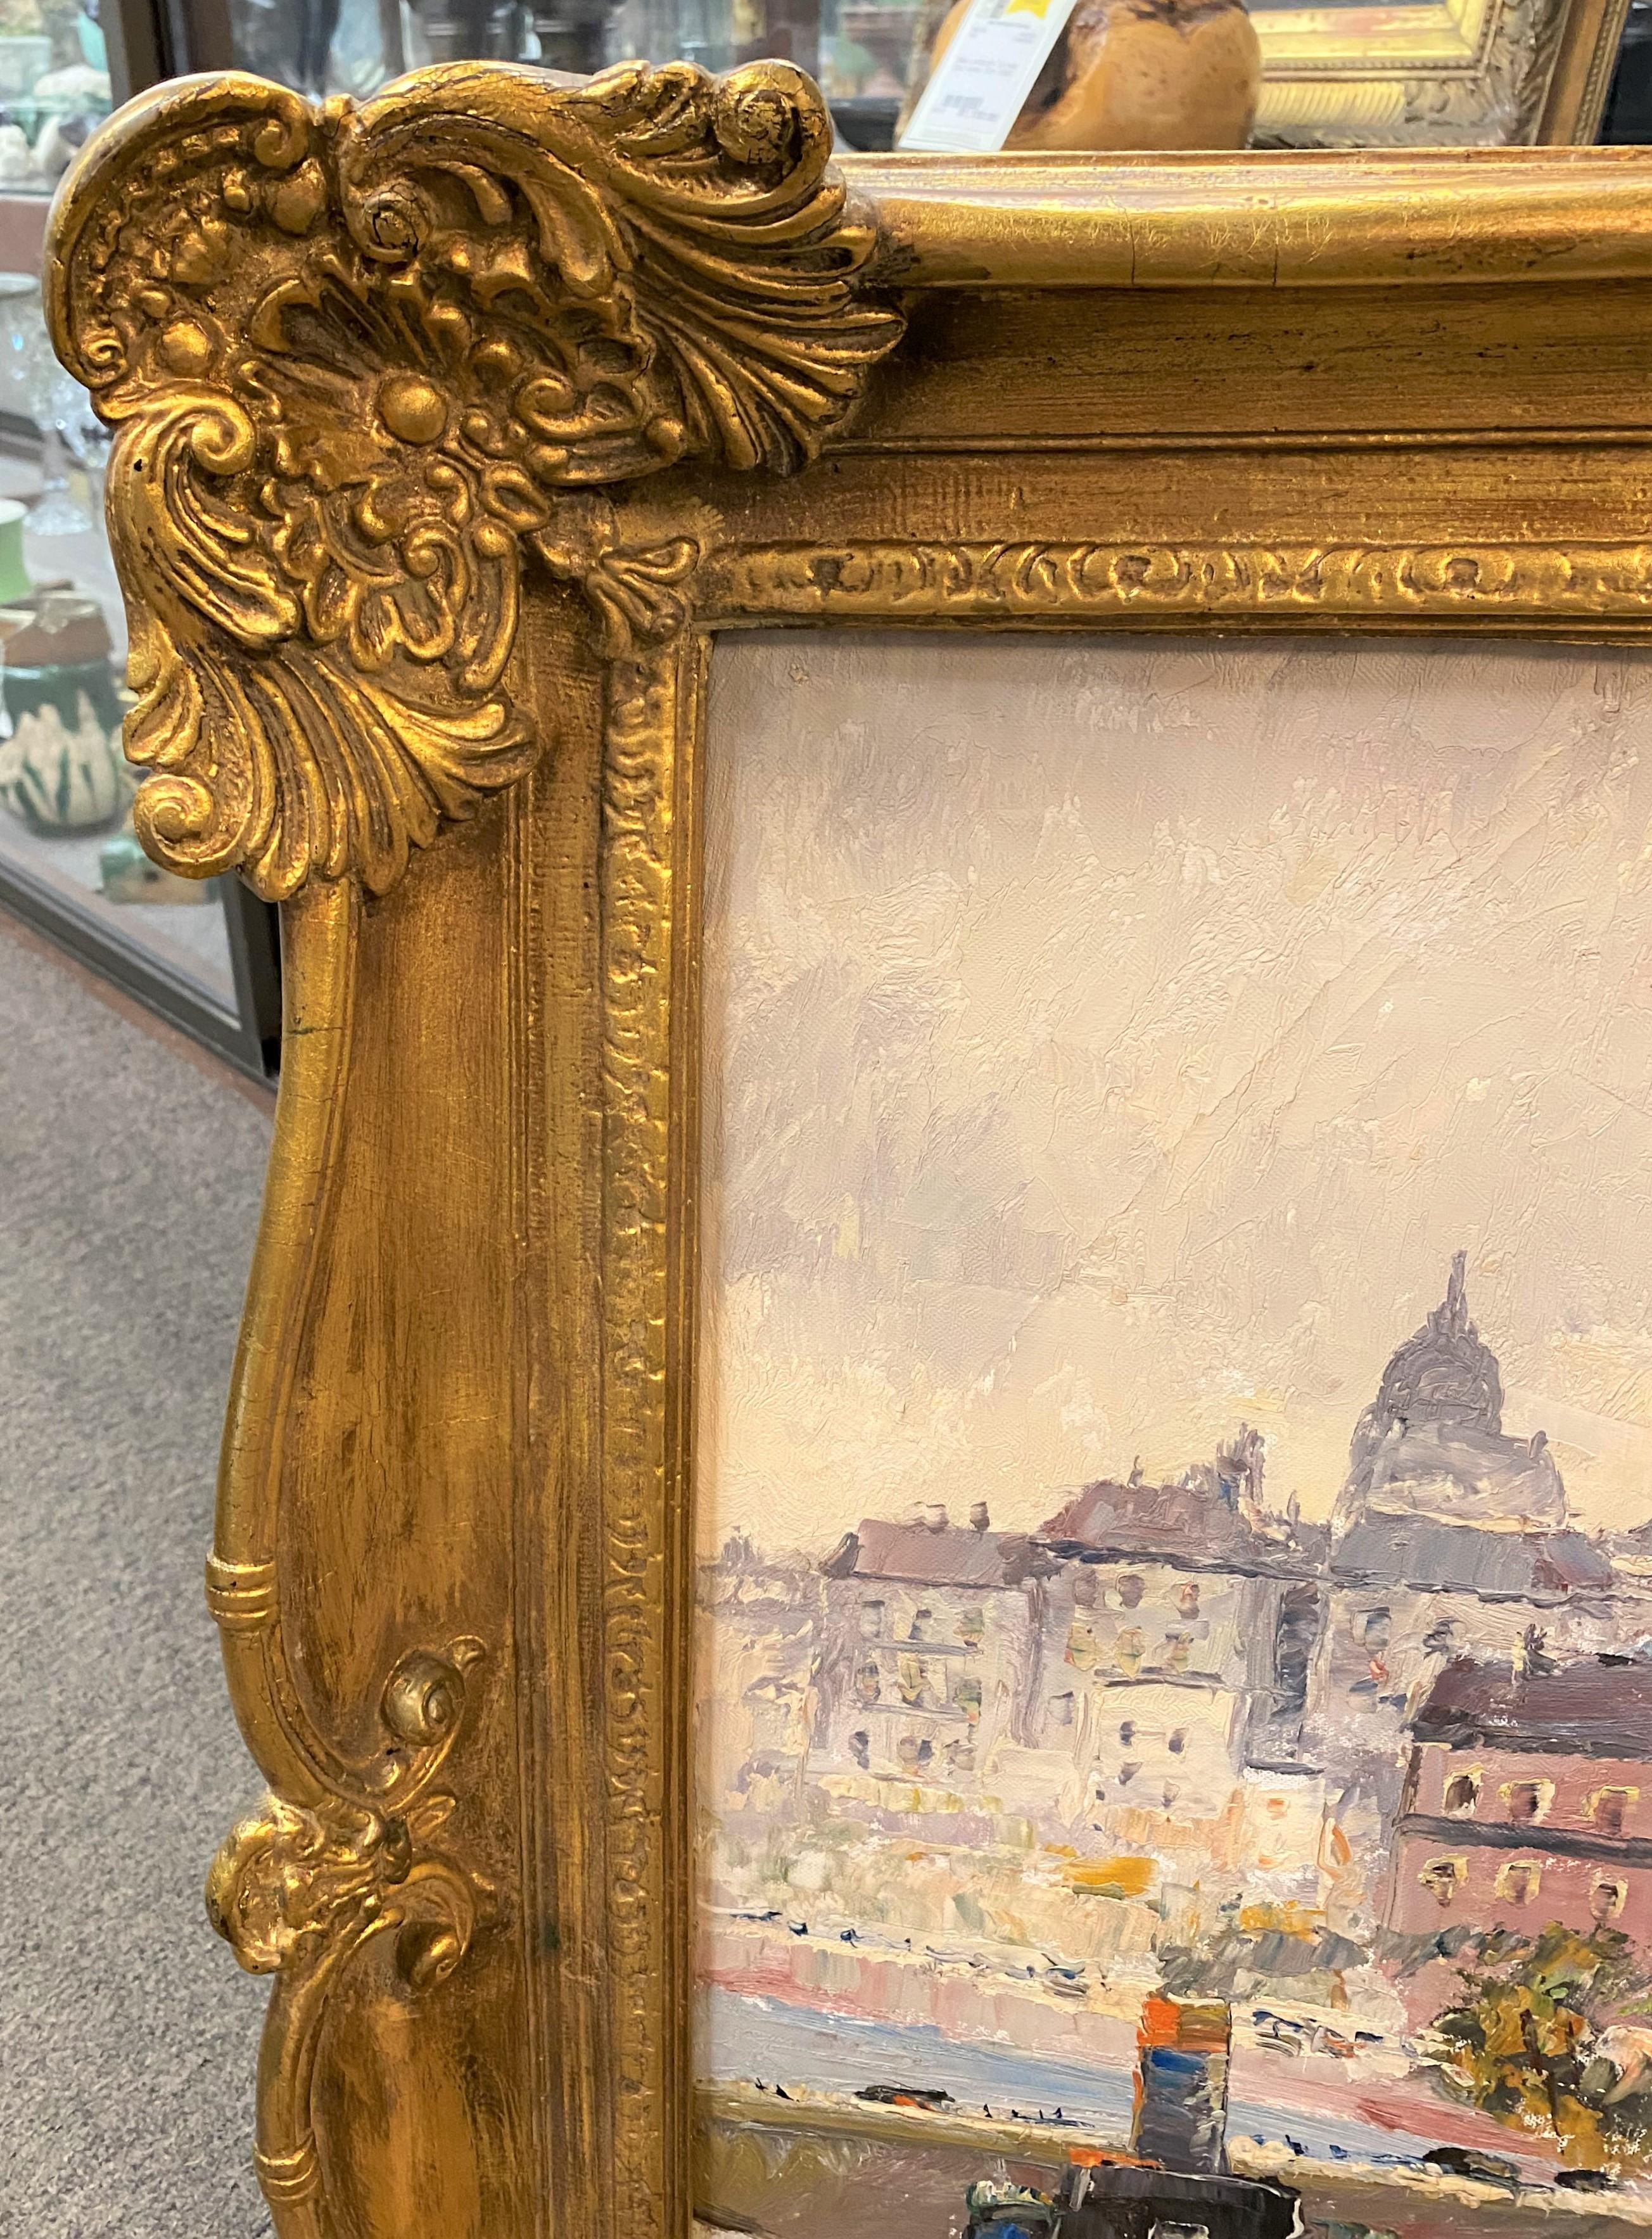 French Parisian Scene - Impressionist Painting by Claude Montier